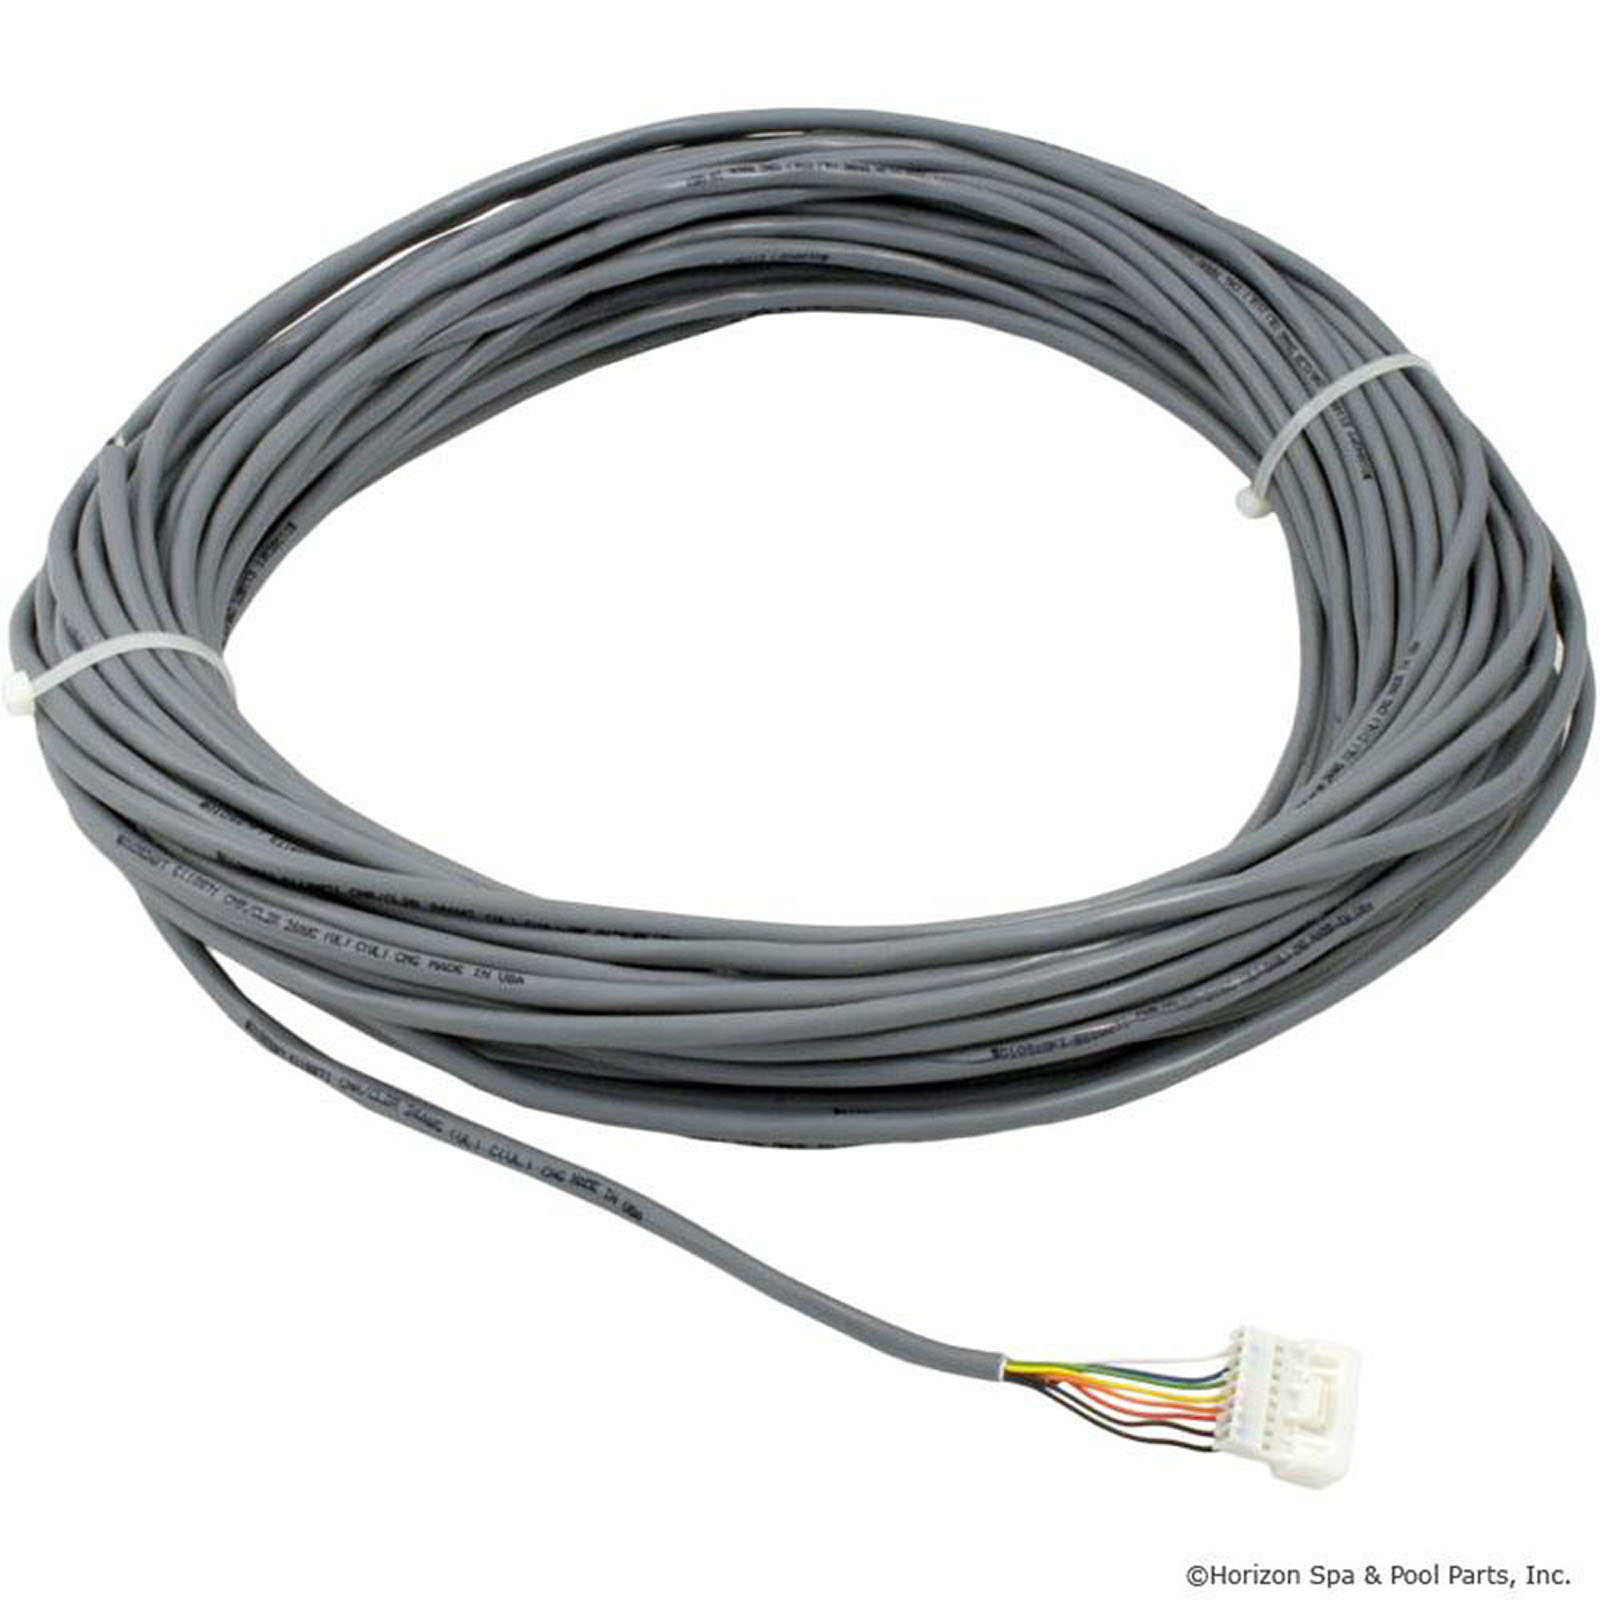 Picture of 48-0194-100 Topside Hydro-Quip HT2 w/Infra Red Sensor 100ft Cord